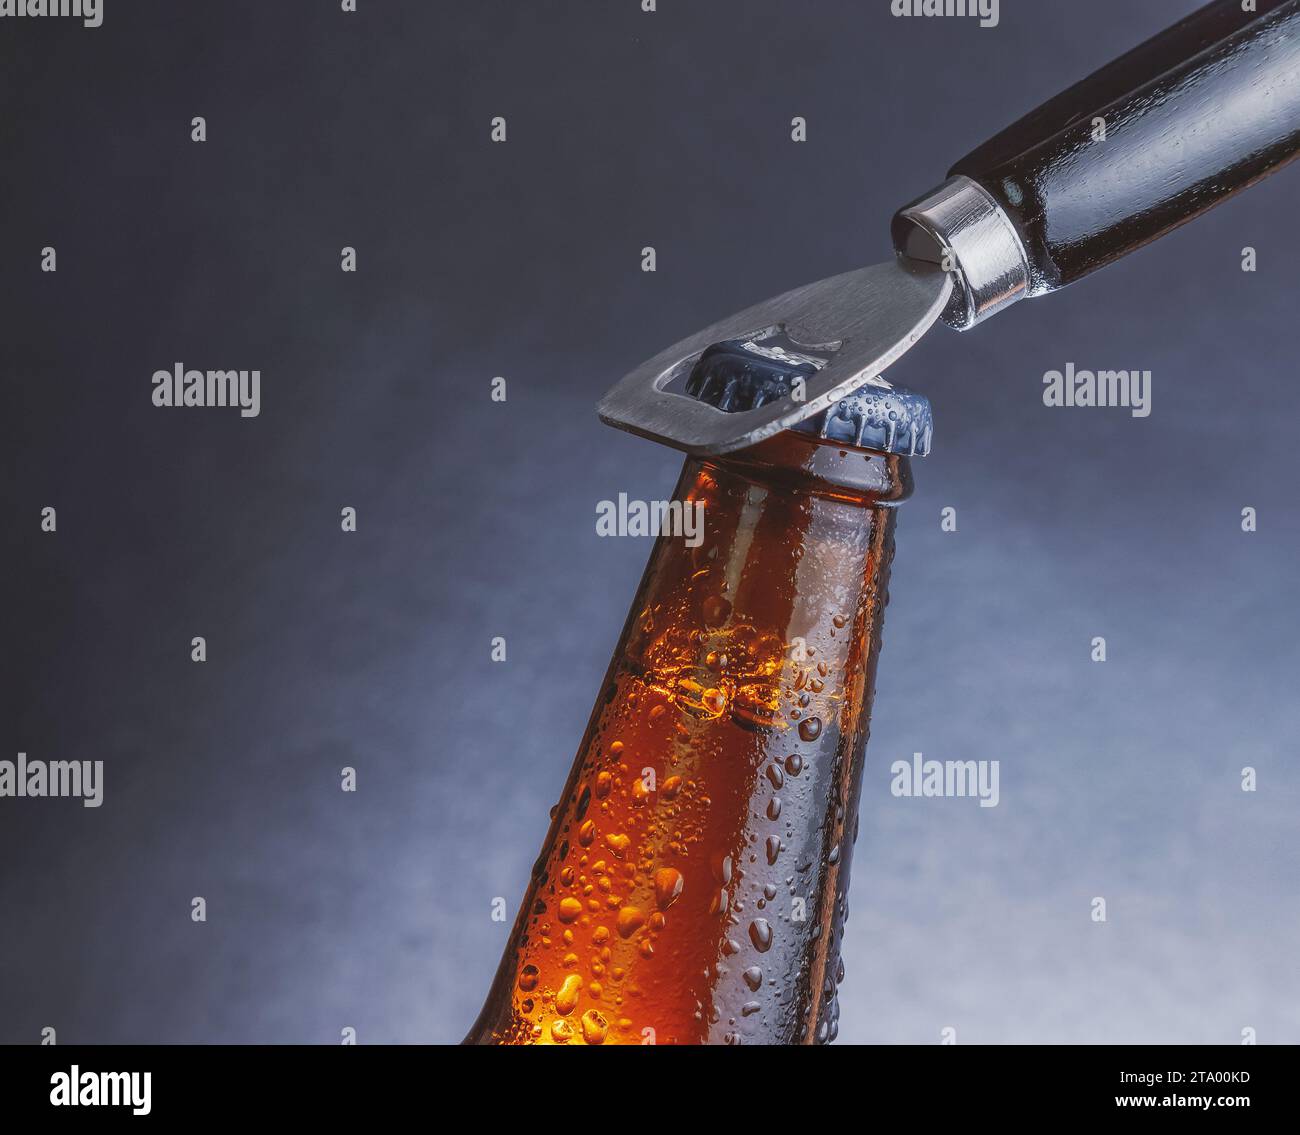 fresh cold beer ale bottle with drops and stopper open with bottle opener on dark background Stock Photo